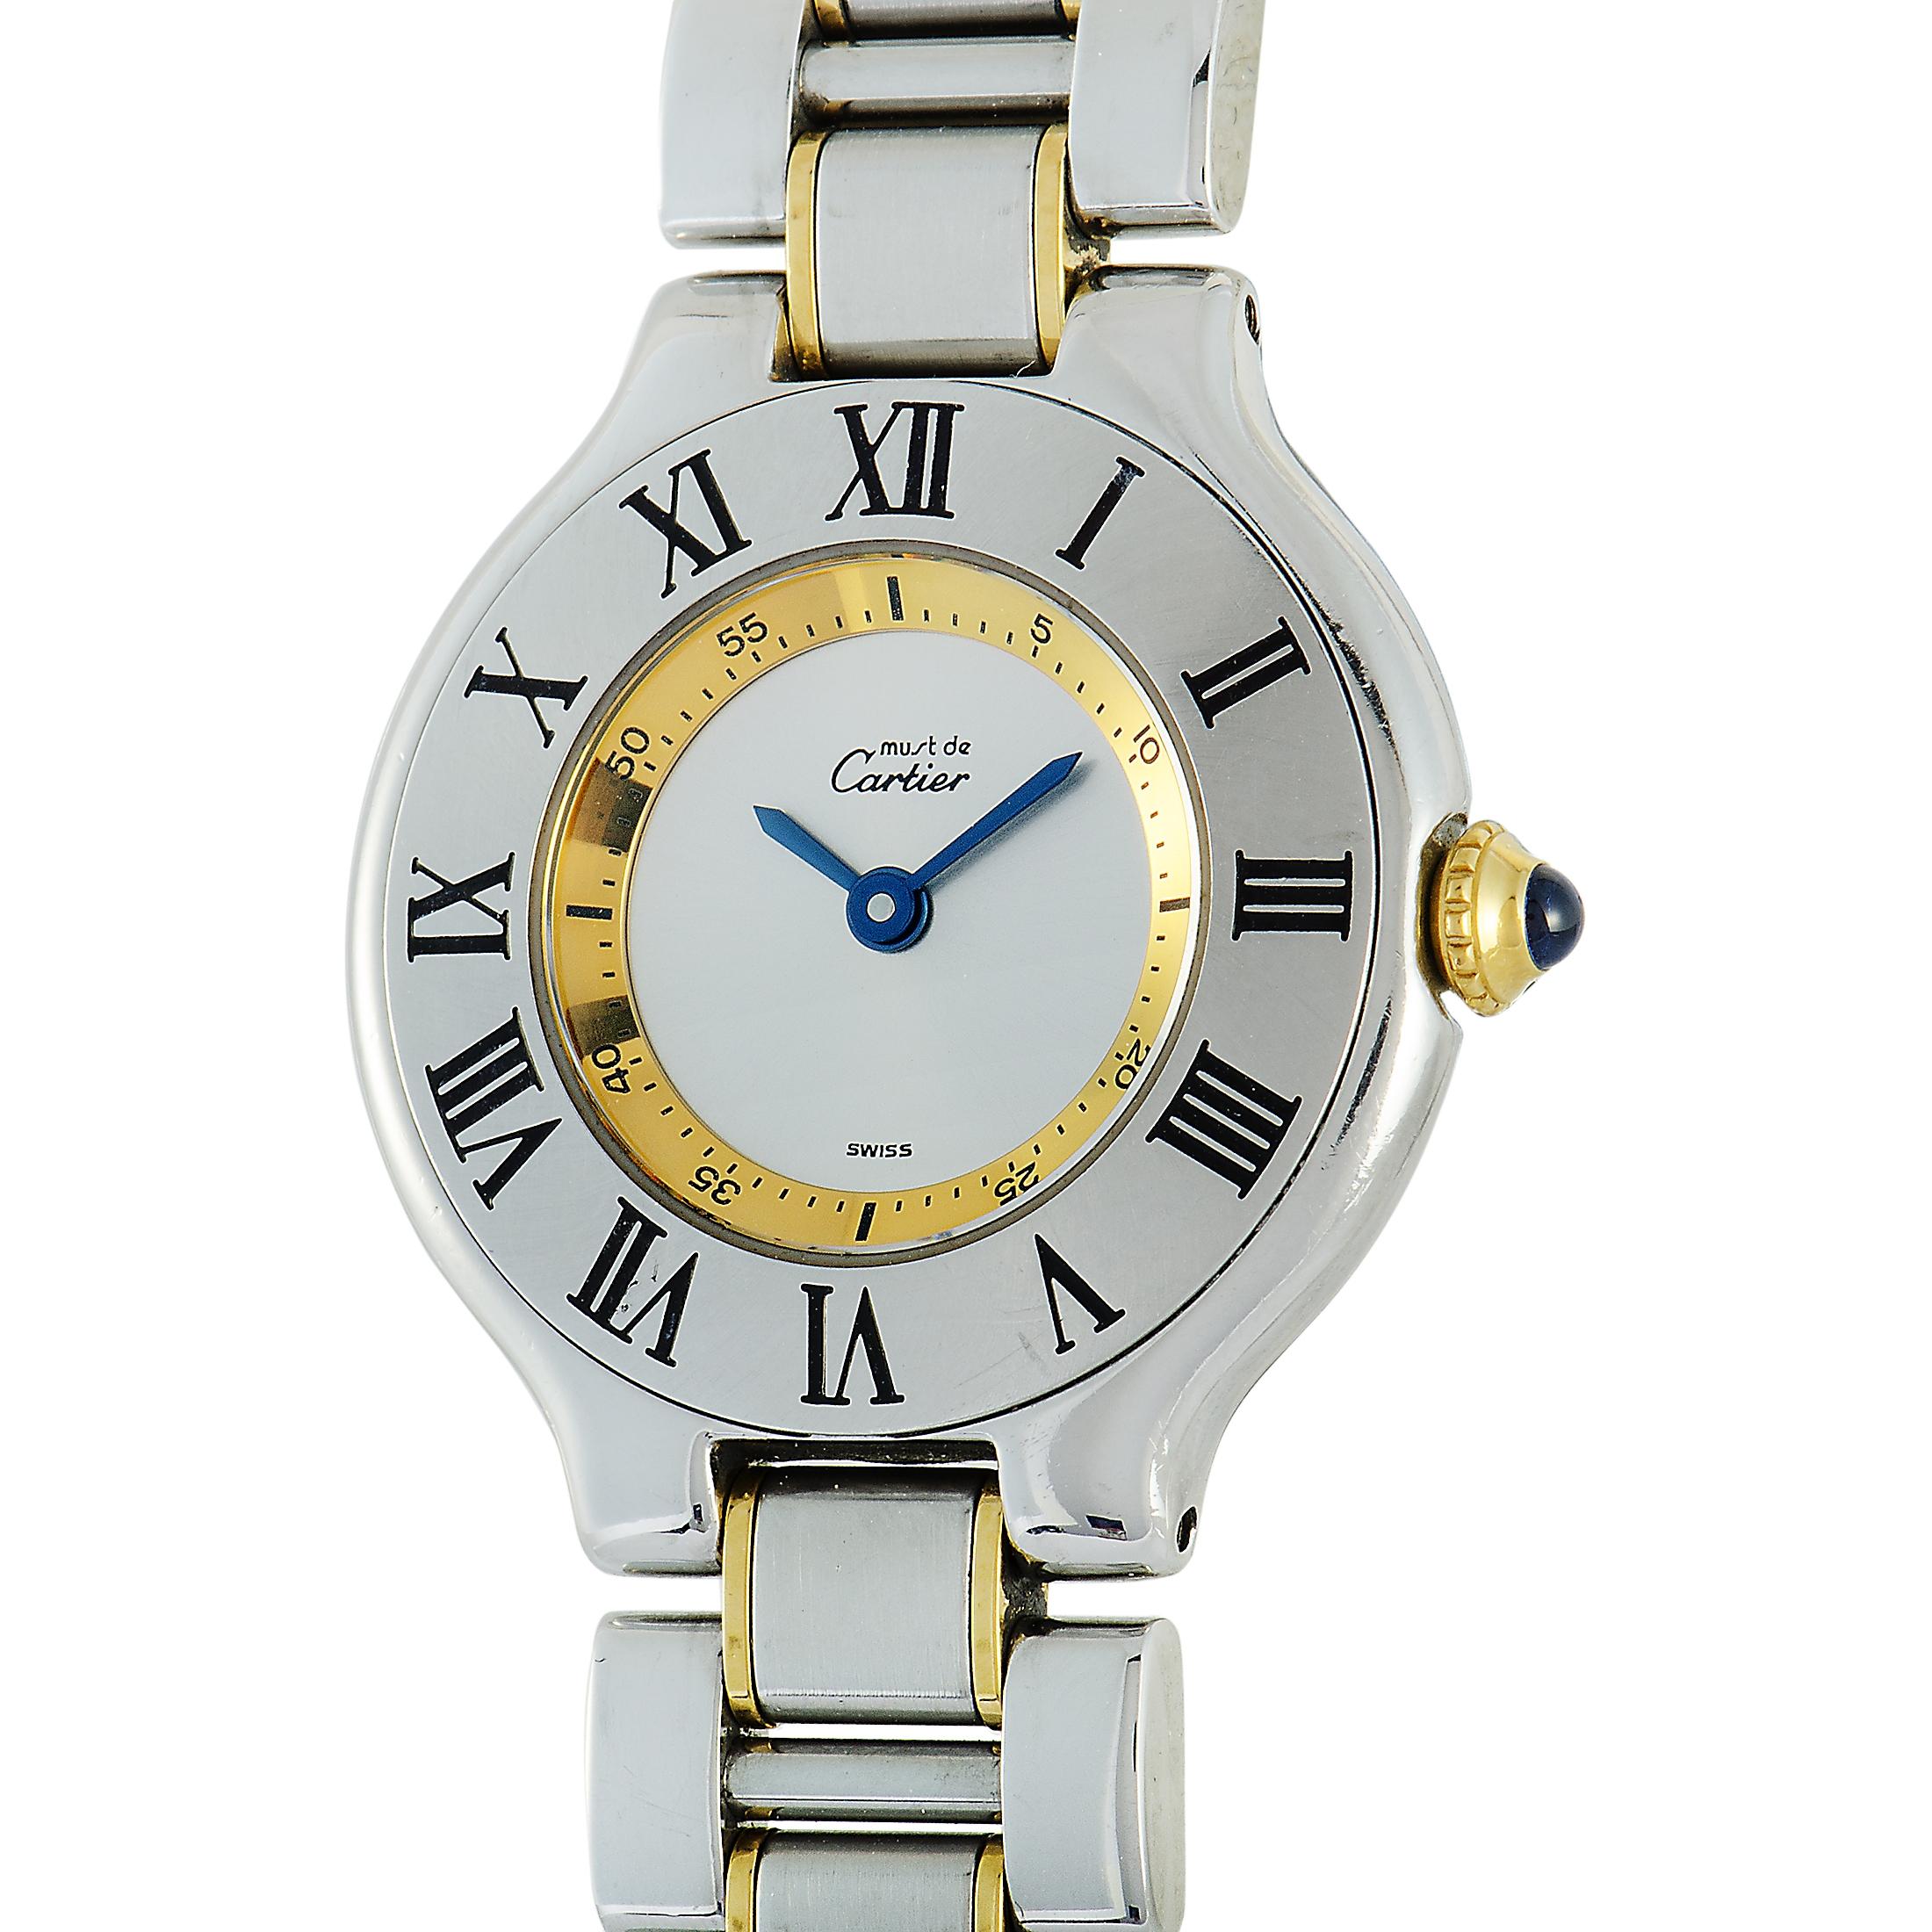 This is the Must 21 by Cartier, reference number 1340.

The watch boasts a water-resistant stainless steel case that is presented on a stainless steel bracelet. This model is powered by a quartz movement and indicates hours and minutes upon the